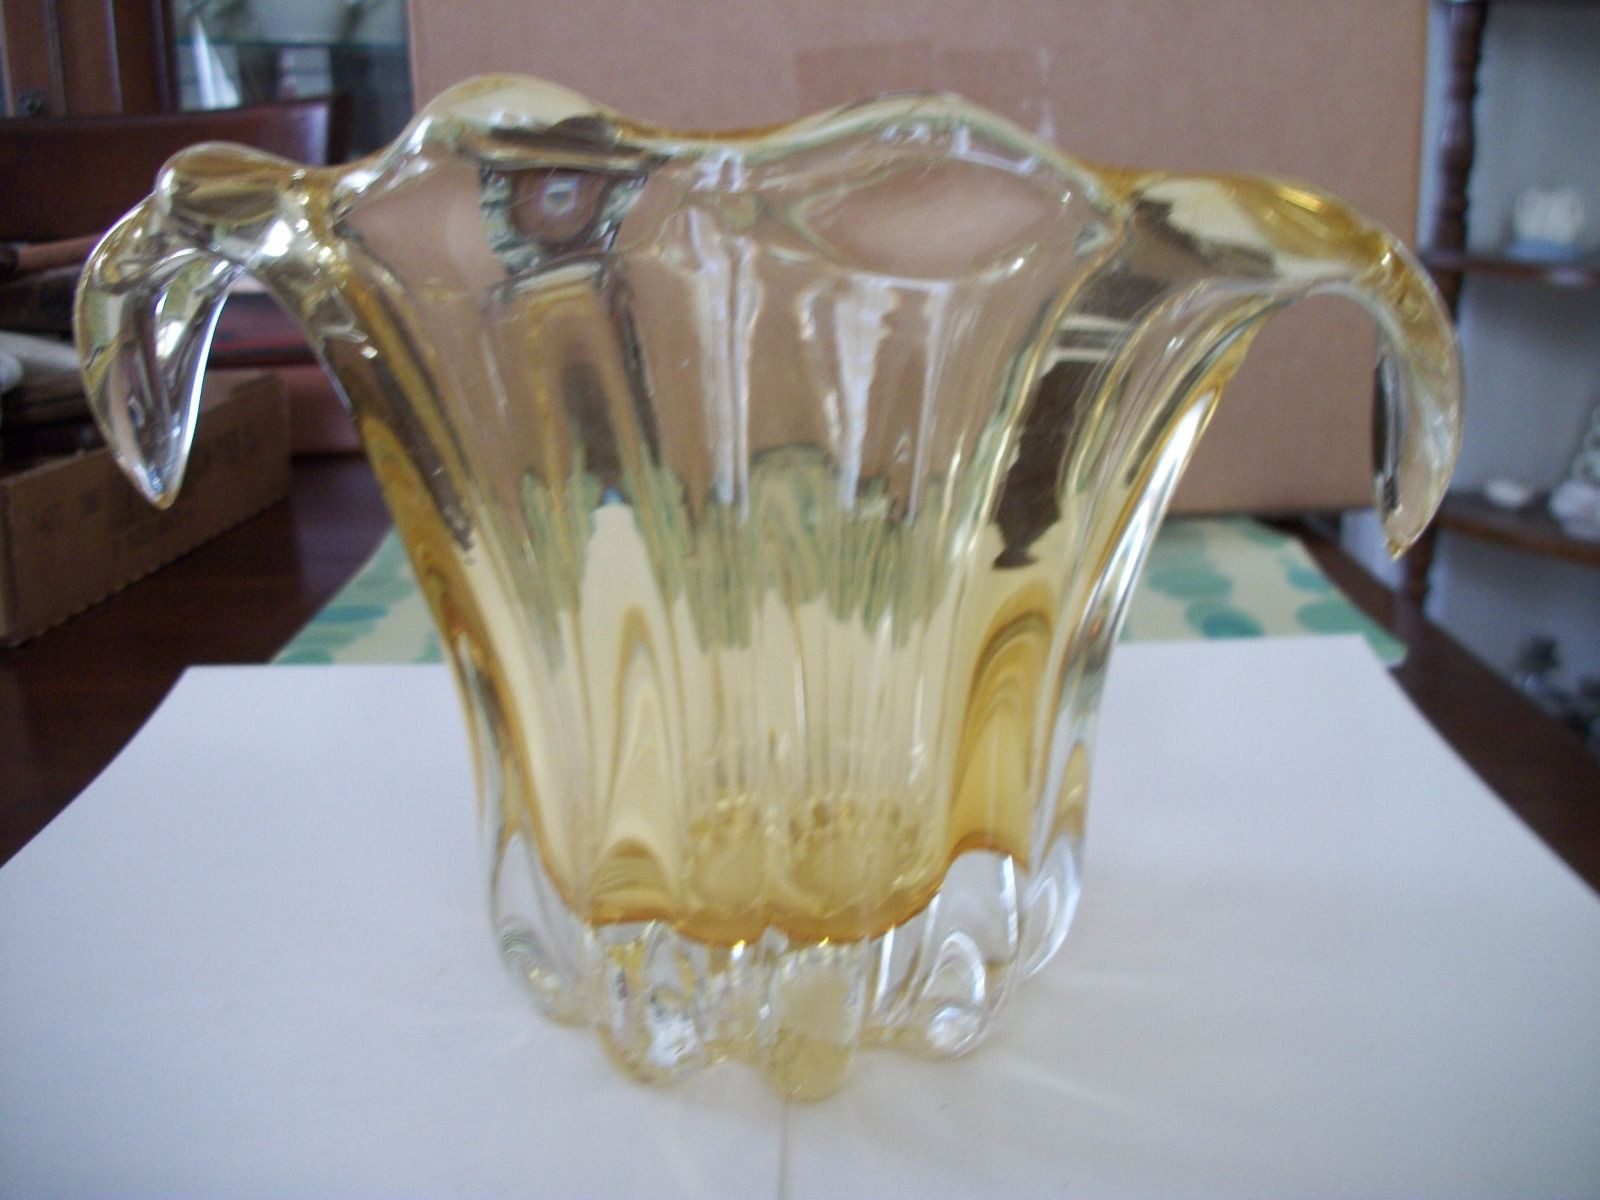 murano tulip vase of vintage hand blown yellow murano style art glass vase 15 99 pertaining to 1 of 1only 1 available